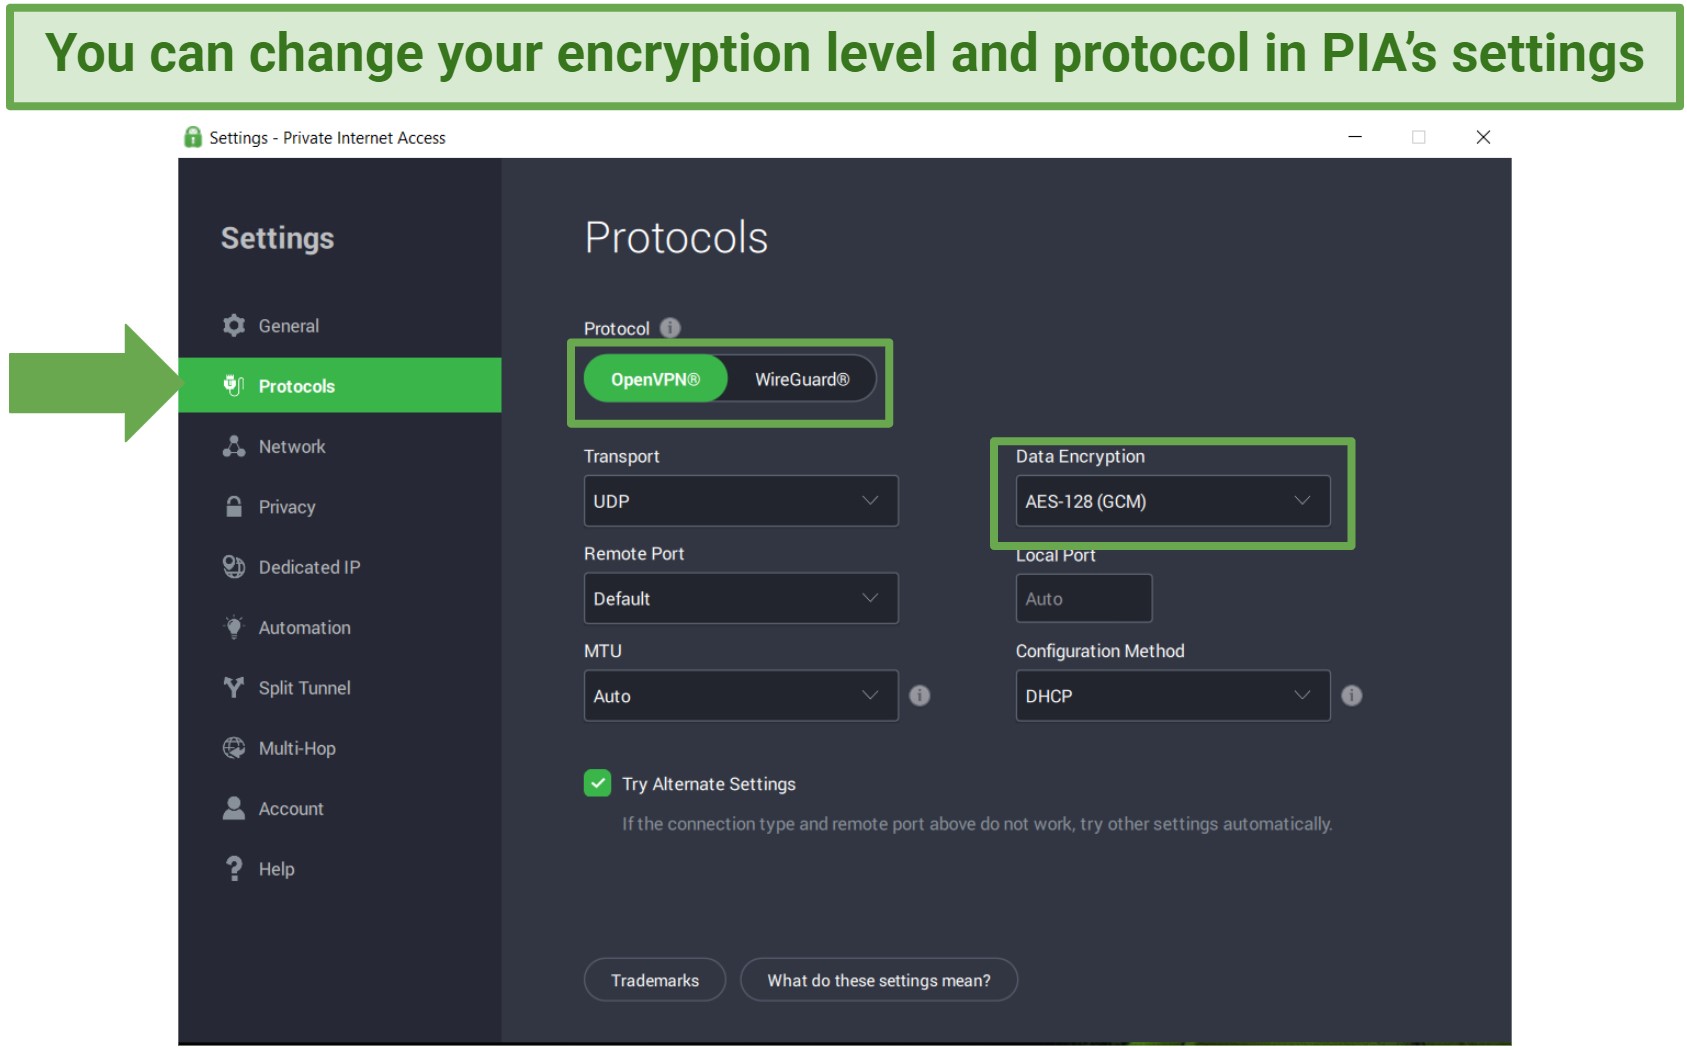 Screenshot of PIA's protocol settings showing the protocol and customizable encryption settings